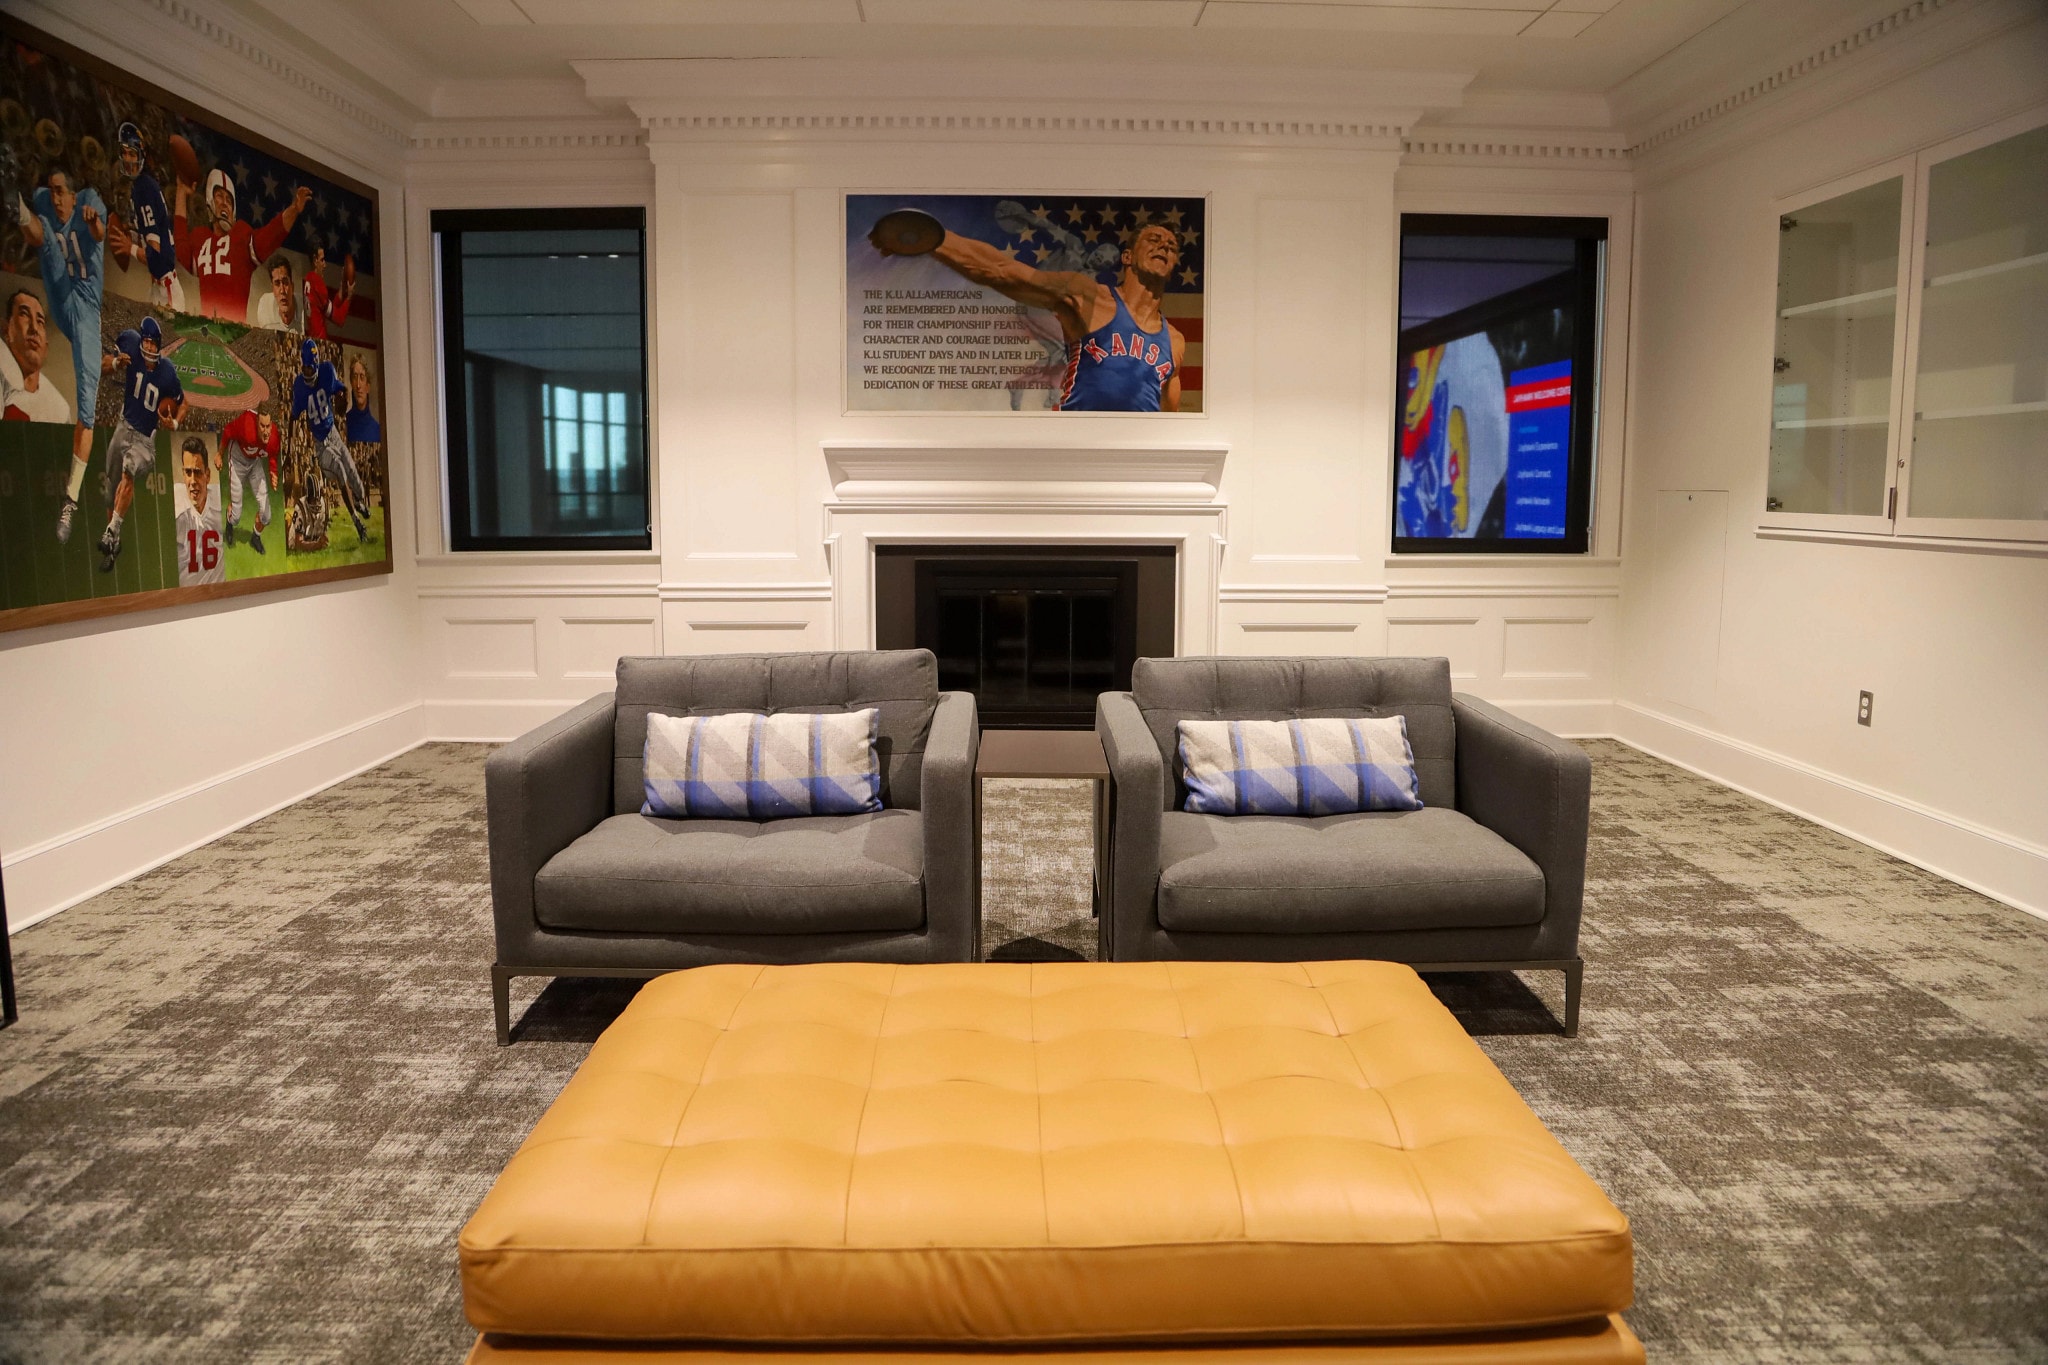 Lounge seating and a fireplace in the All-American Room at the Jayhawk Welcome Center